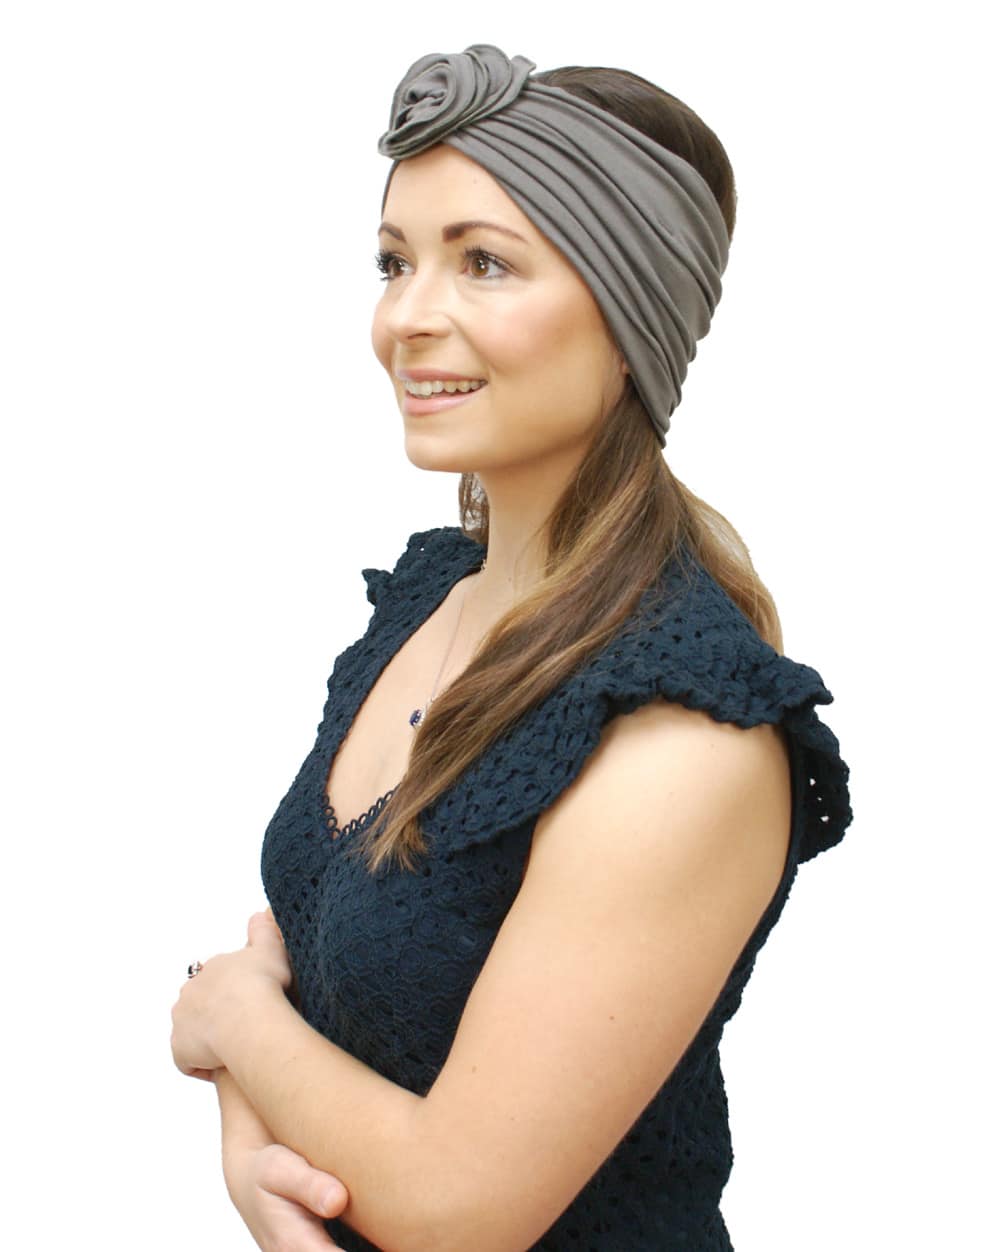 Stylish Headbands To Hide Thinning Hair or Patchy Hair Loss